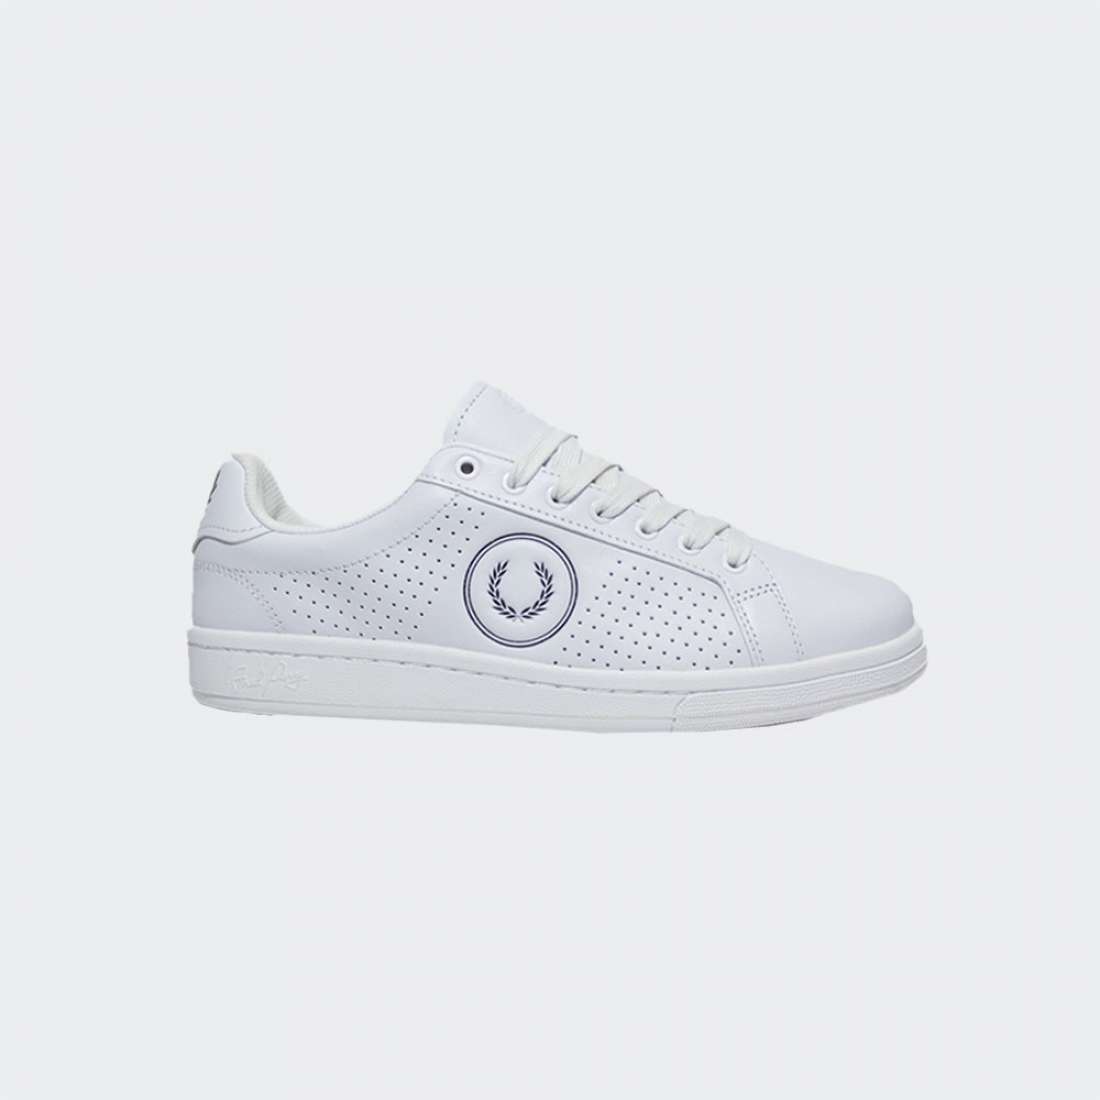 FRED PERRY B721 205